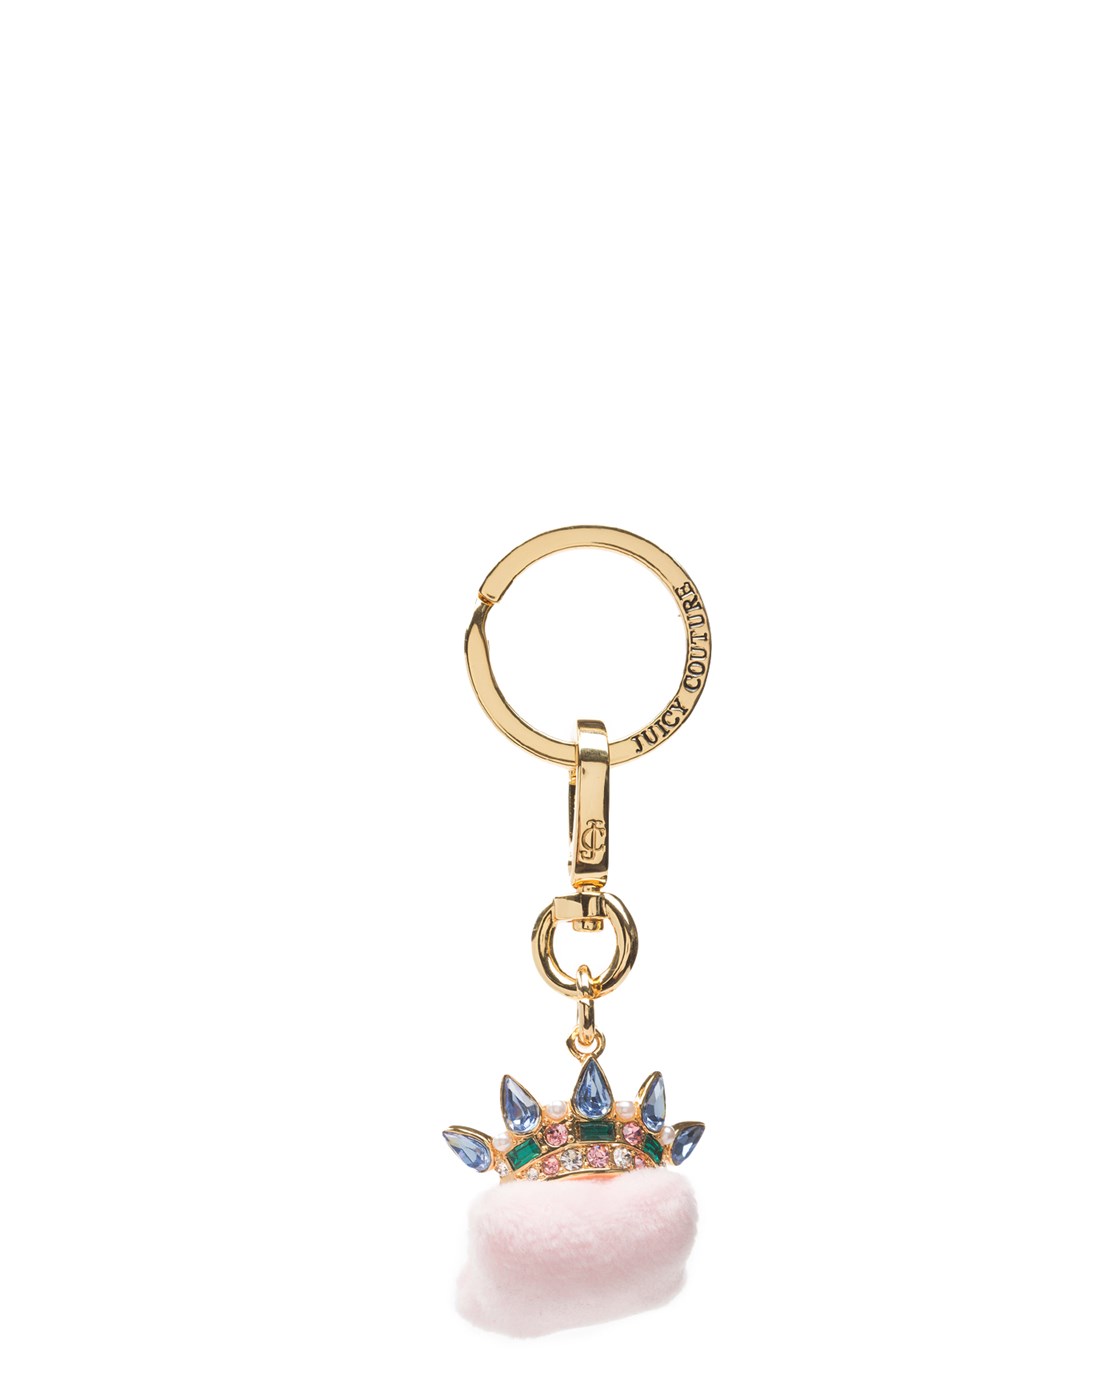 Juicy Couture Pillow Crown Key Fob